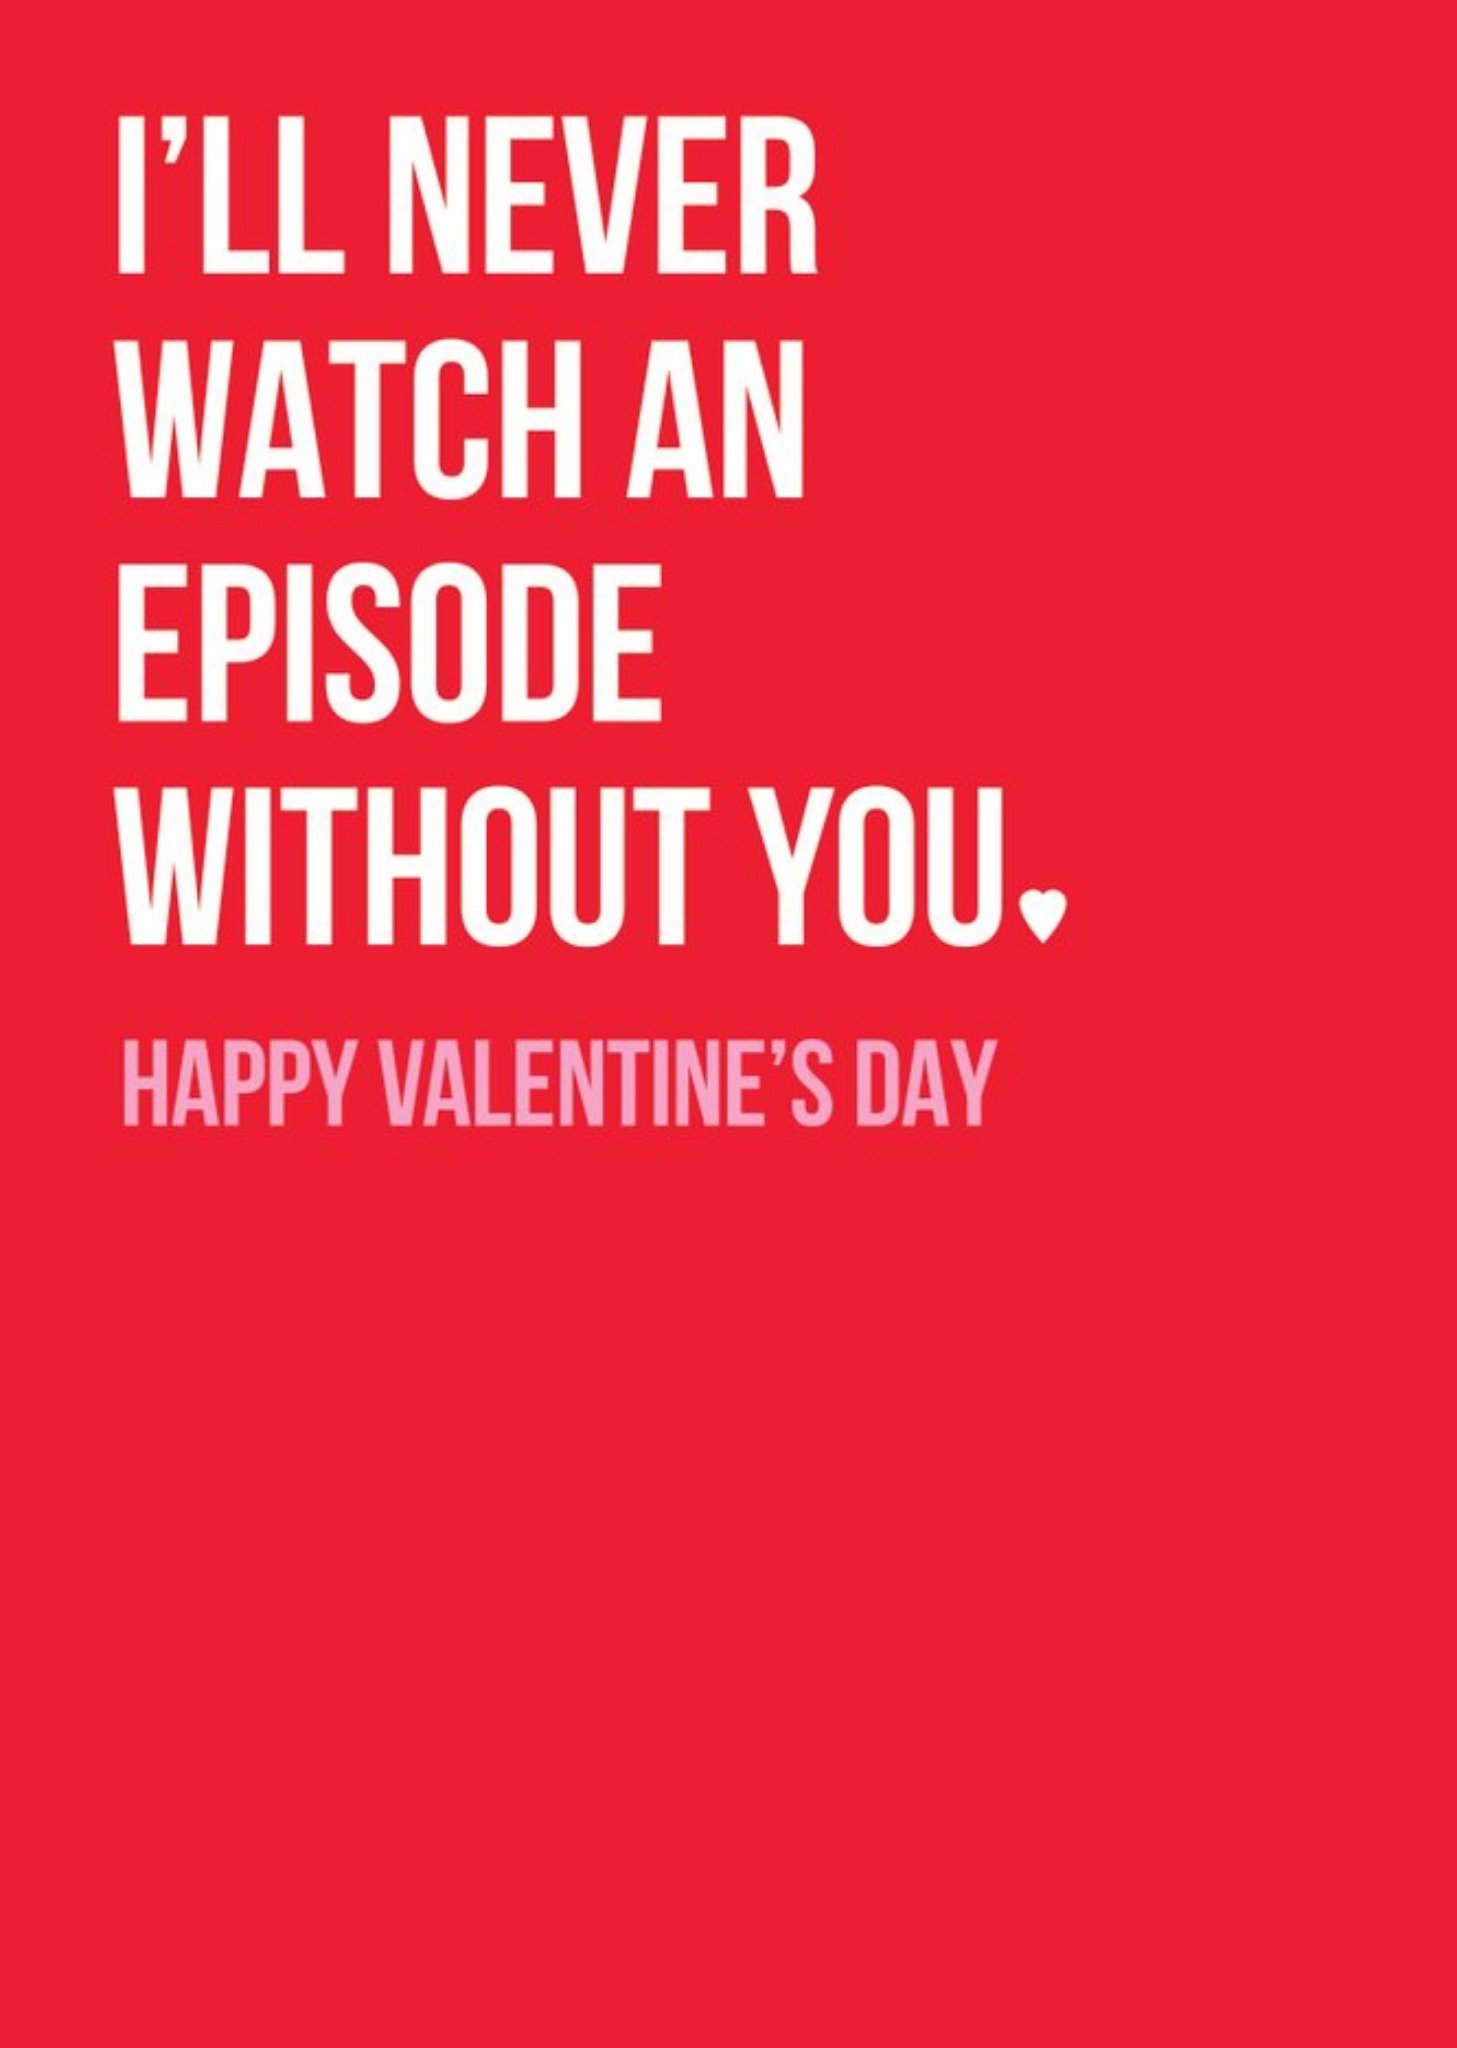 Moonpig Typographic Never Watch Without You Valentines Card Ecard